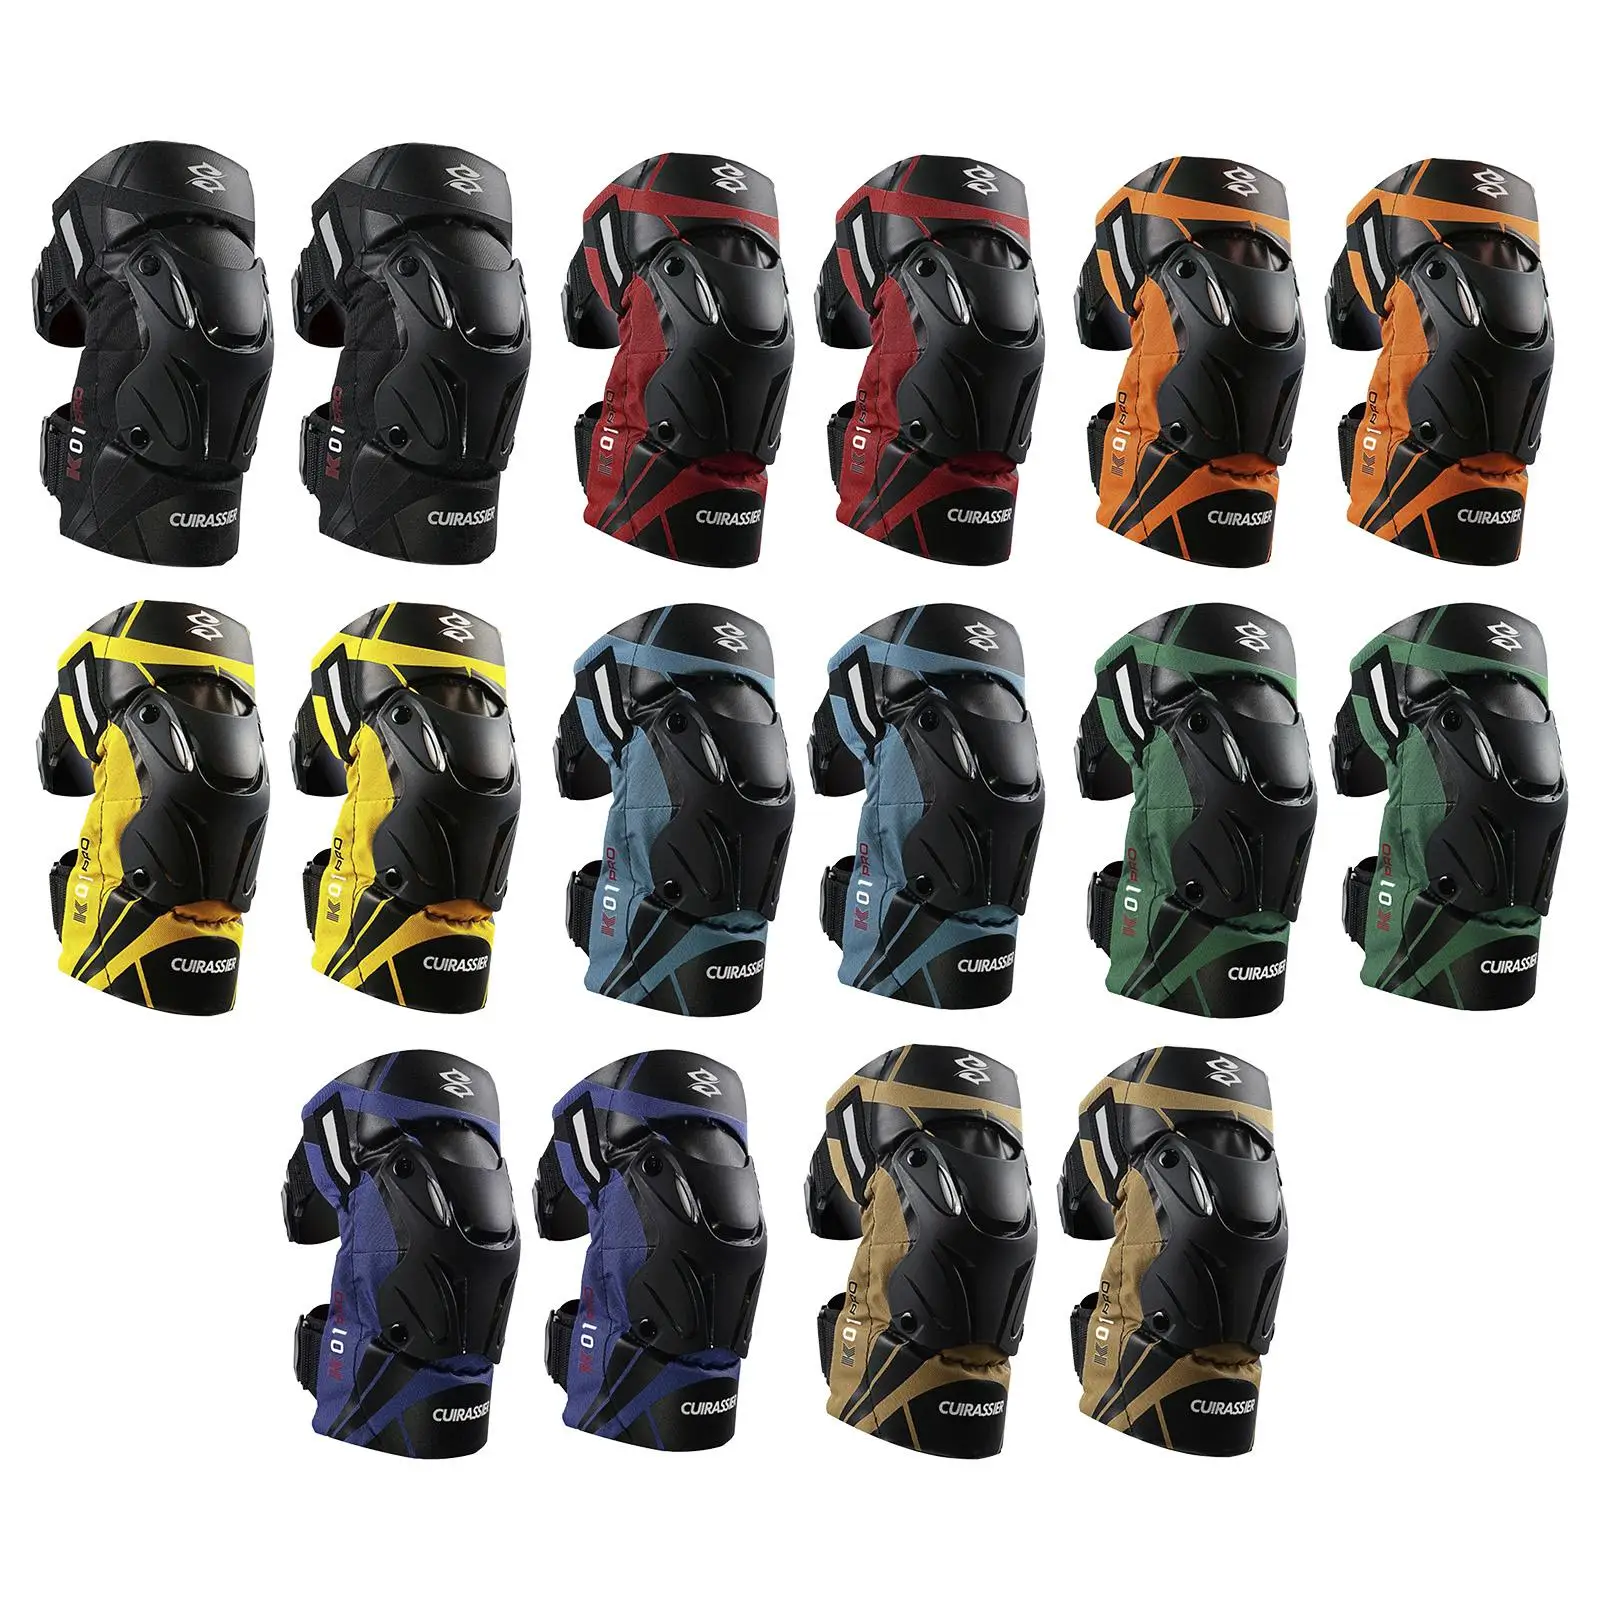 

2x Motorcycle Knee Pads Guard for Motocross Racing Thermal Insulation